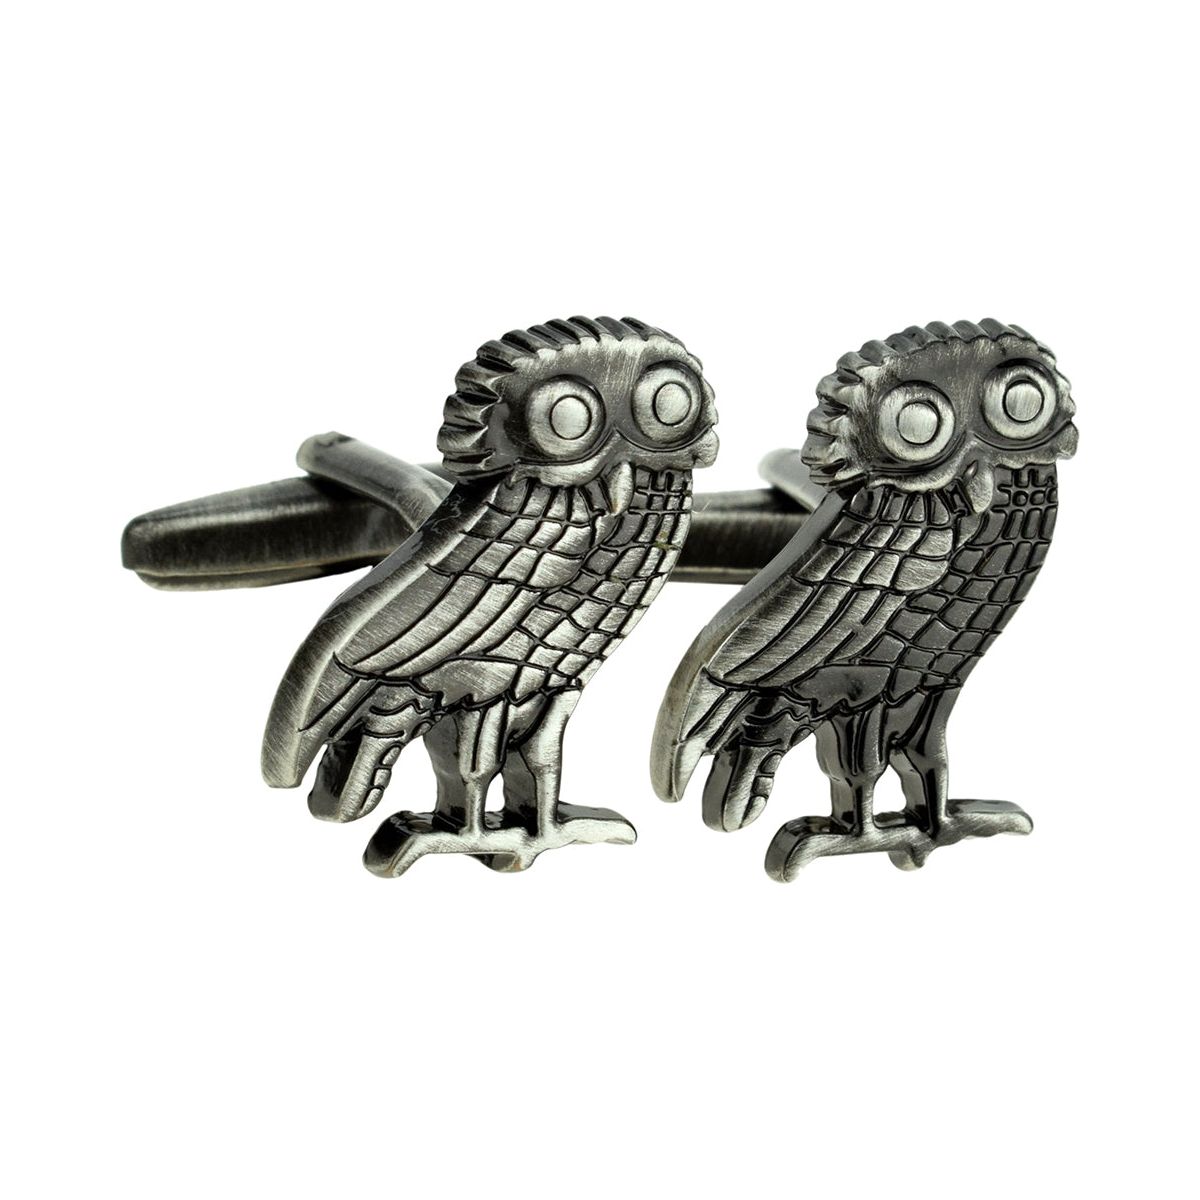 Wise Old Owl Antique Finish Cufflinks - Ashton and Finch